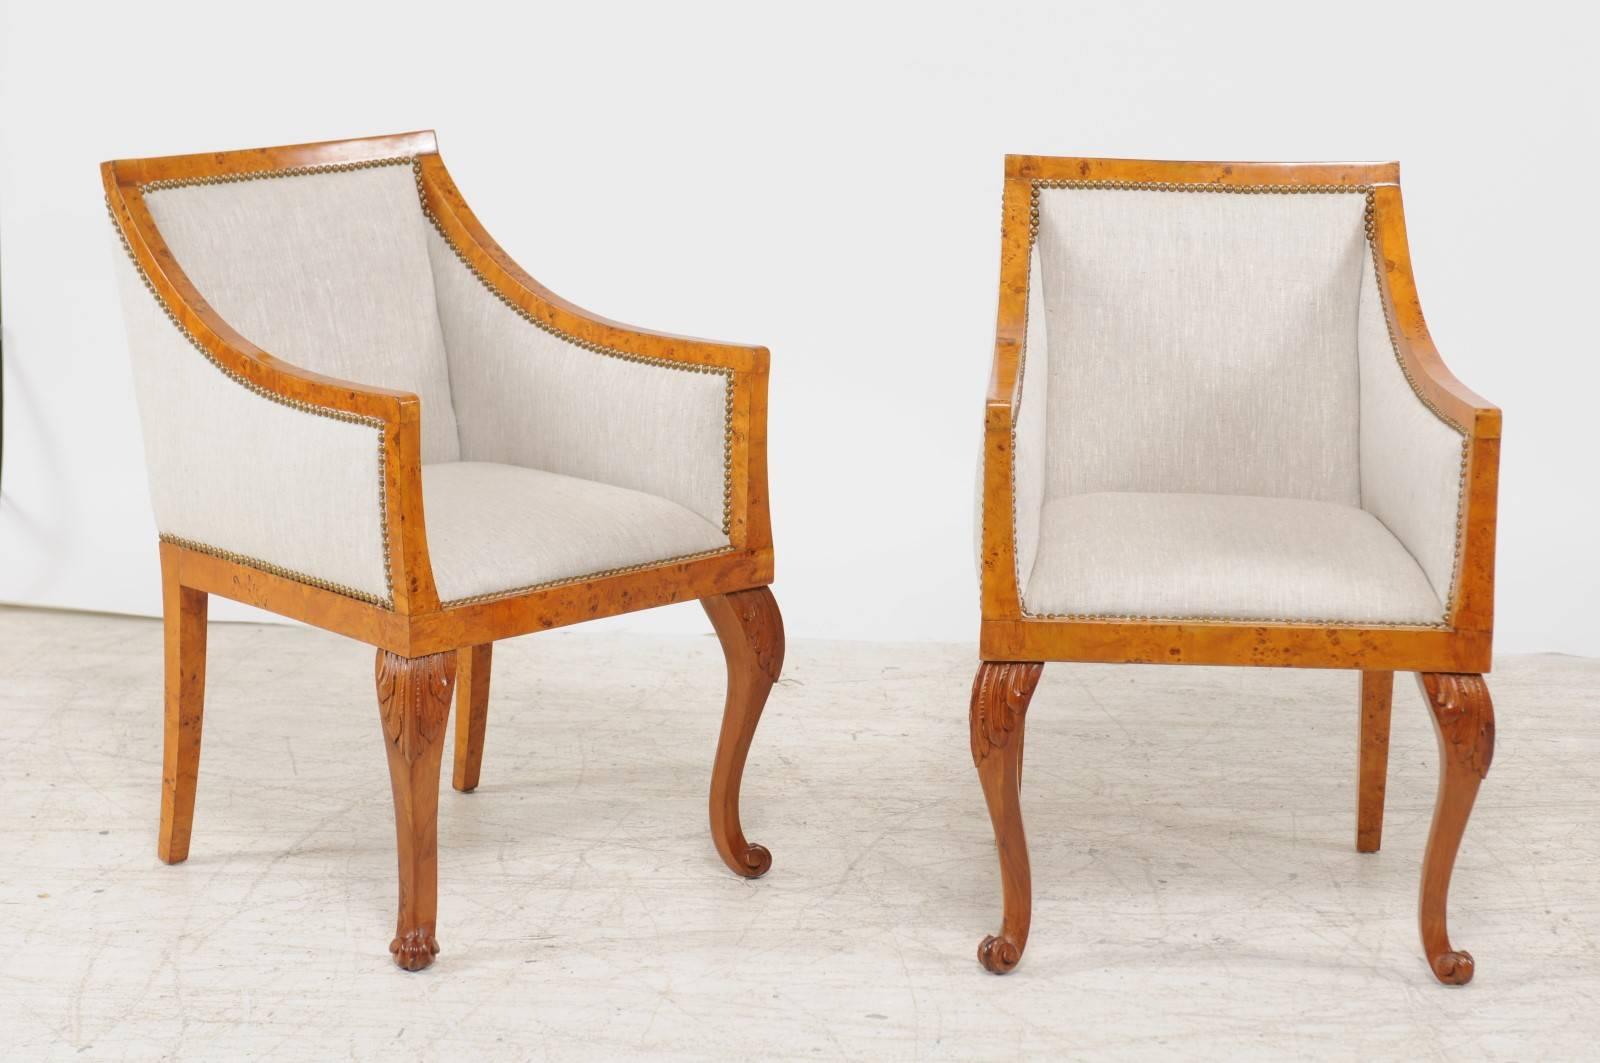 A pair of mid-19th century Biedermeier Austrian burled wood bergère chairs with new linen upholstery and brass nailhead trim. Each of this pair of Austrian armchairs features the typical traits of the Biedermeier period. The burled blond wood and